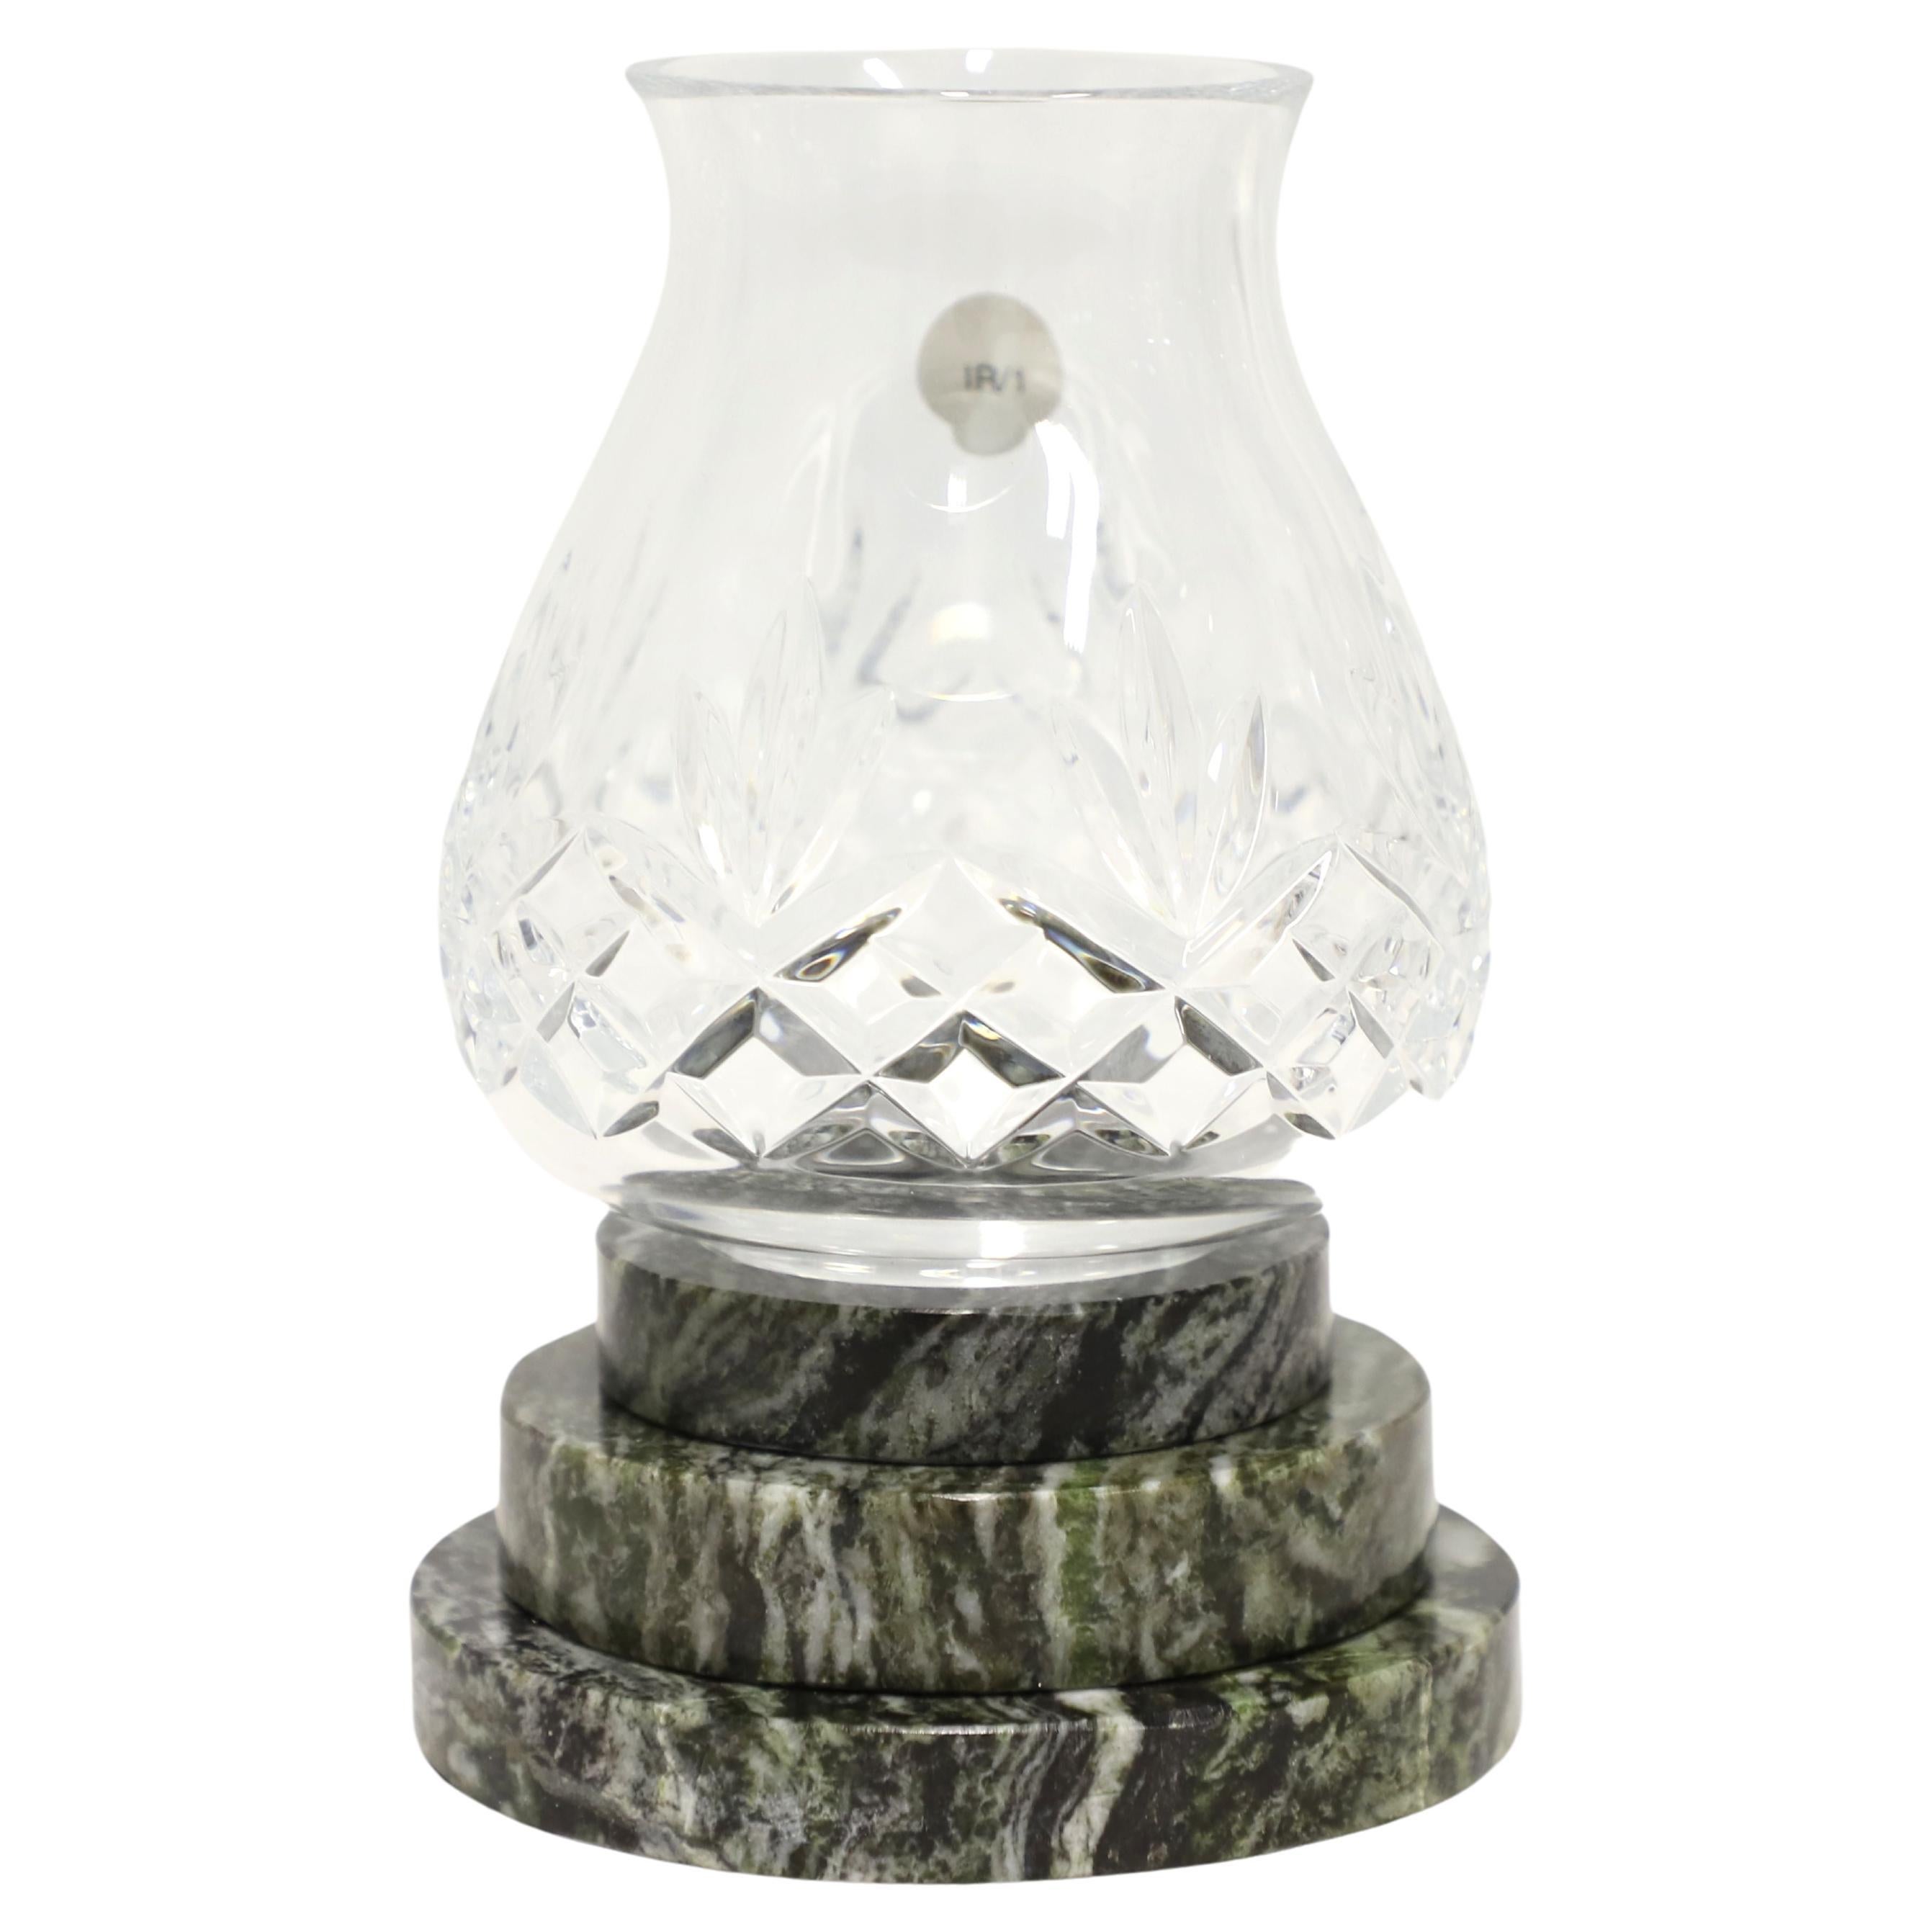 WATERFORD Crystal Ireland 5" Ferndale Hurricane Lamp with Connemara Marble For Sale